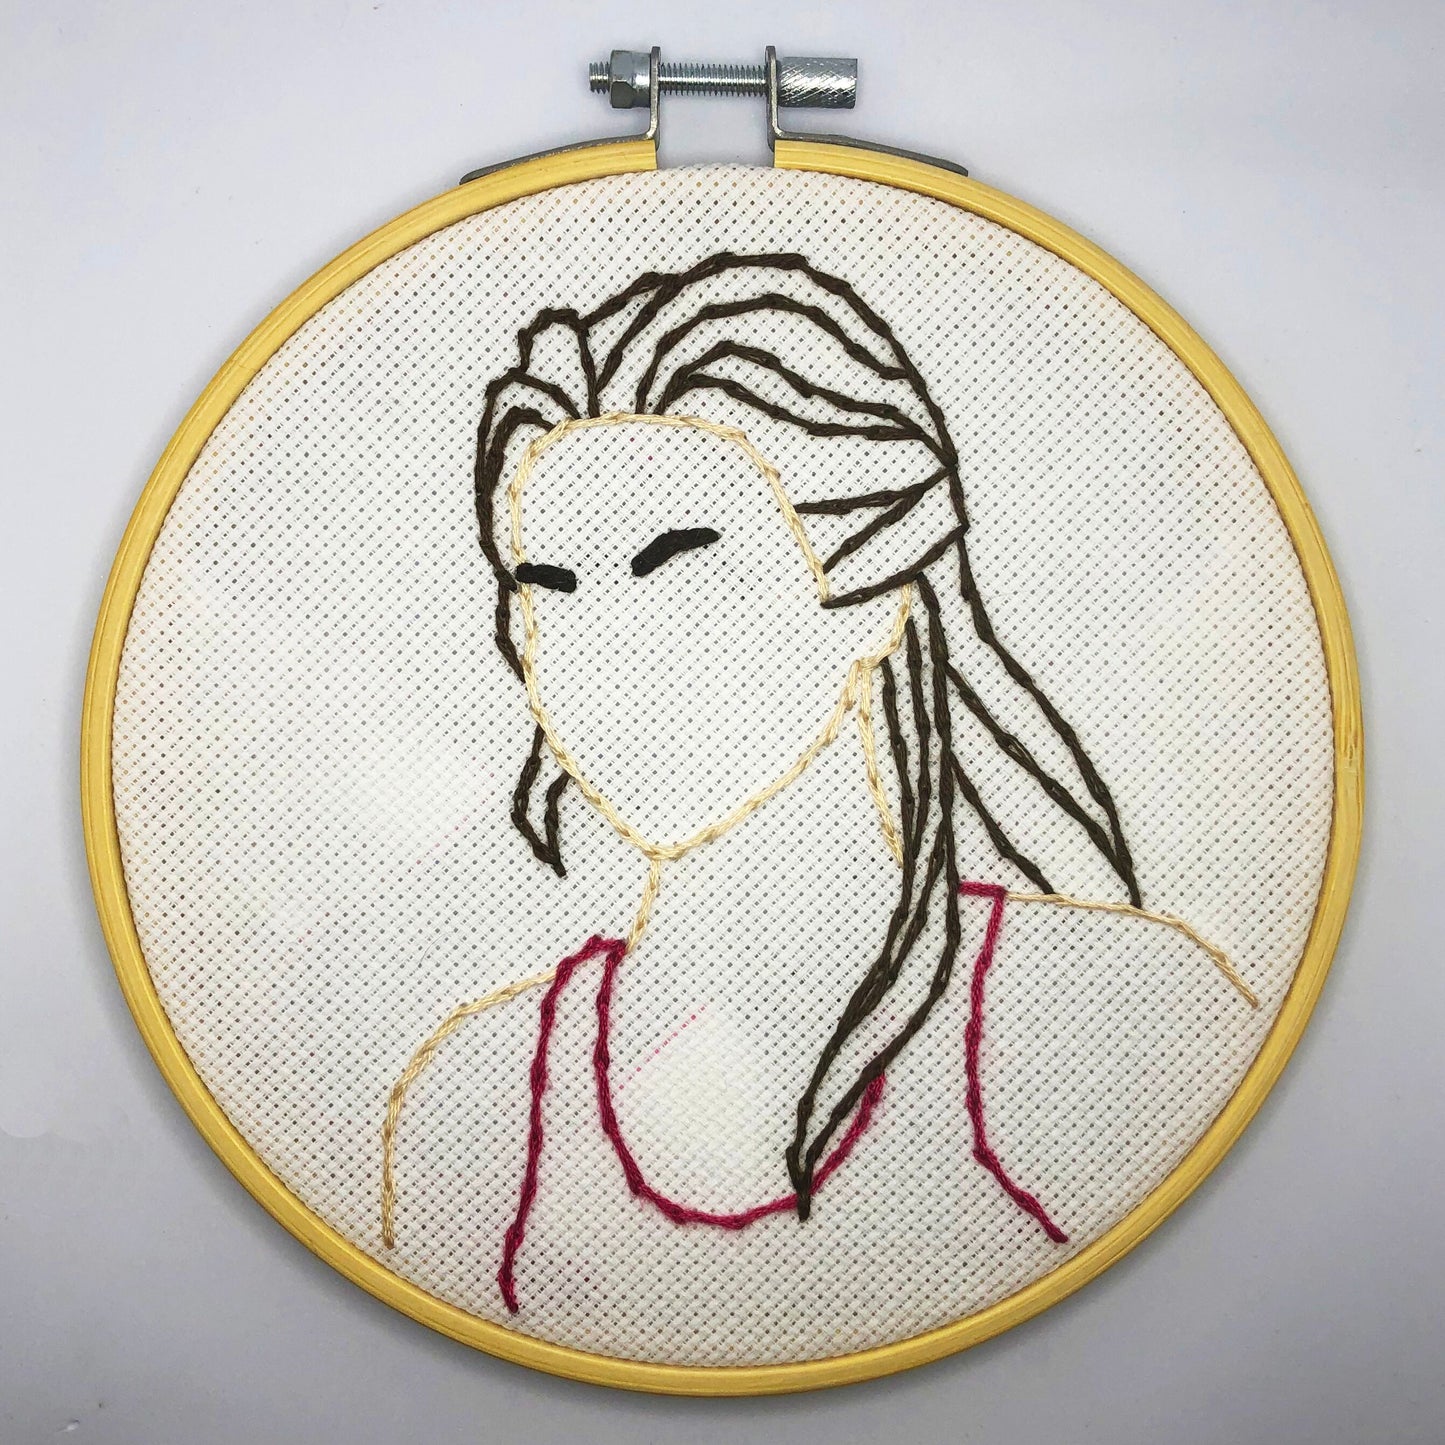 LOST embroidery